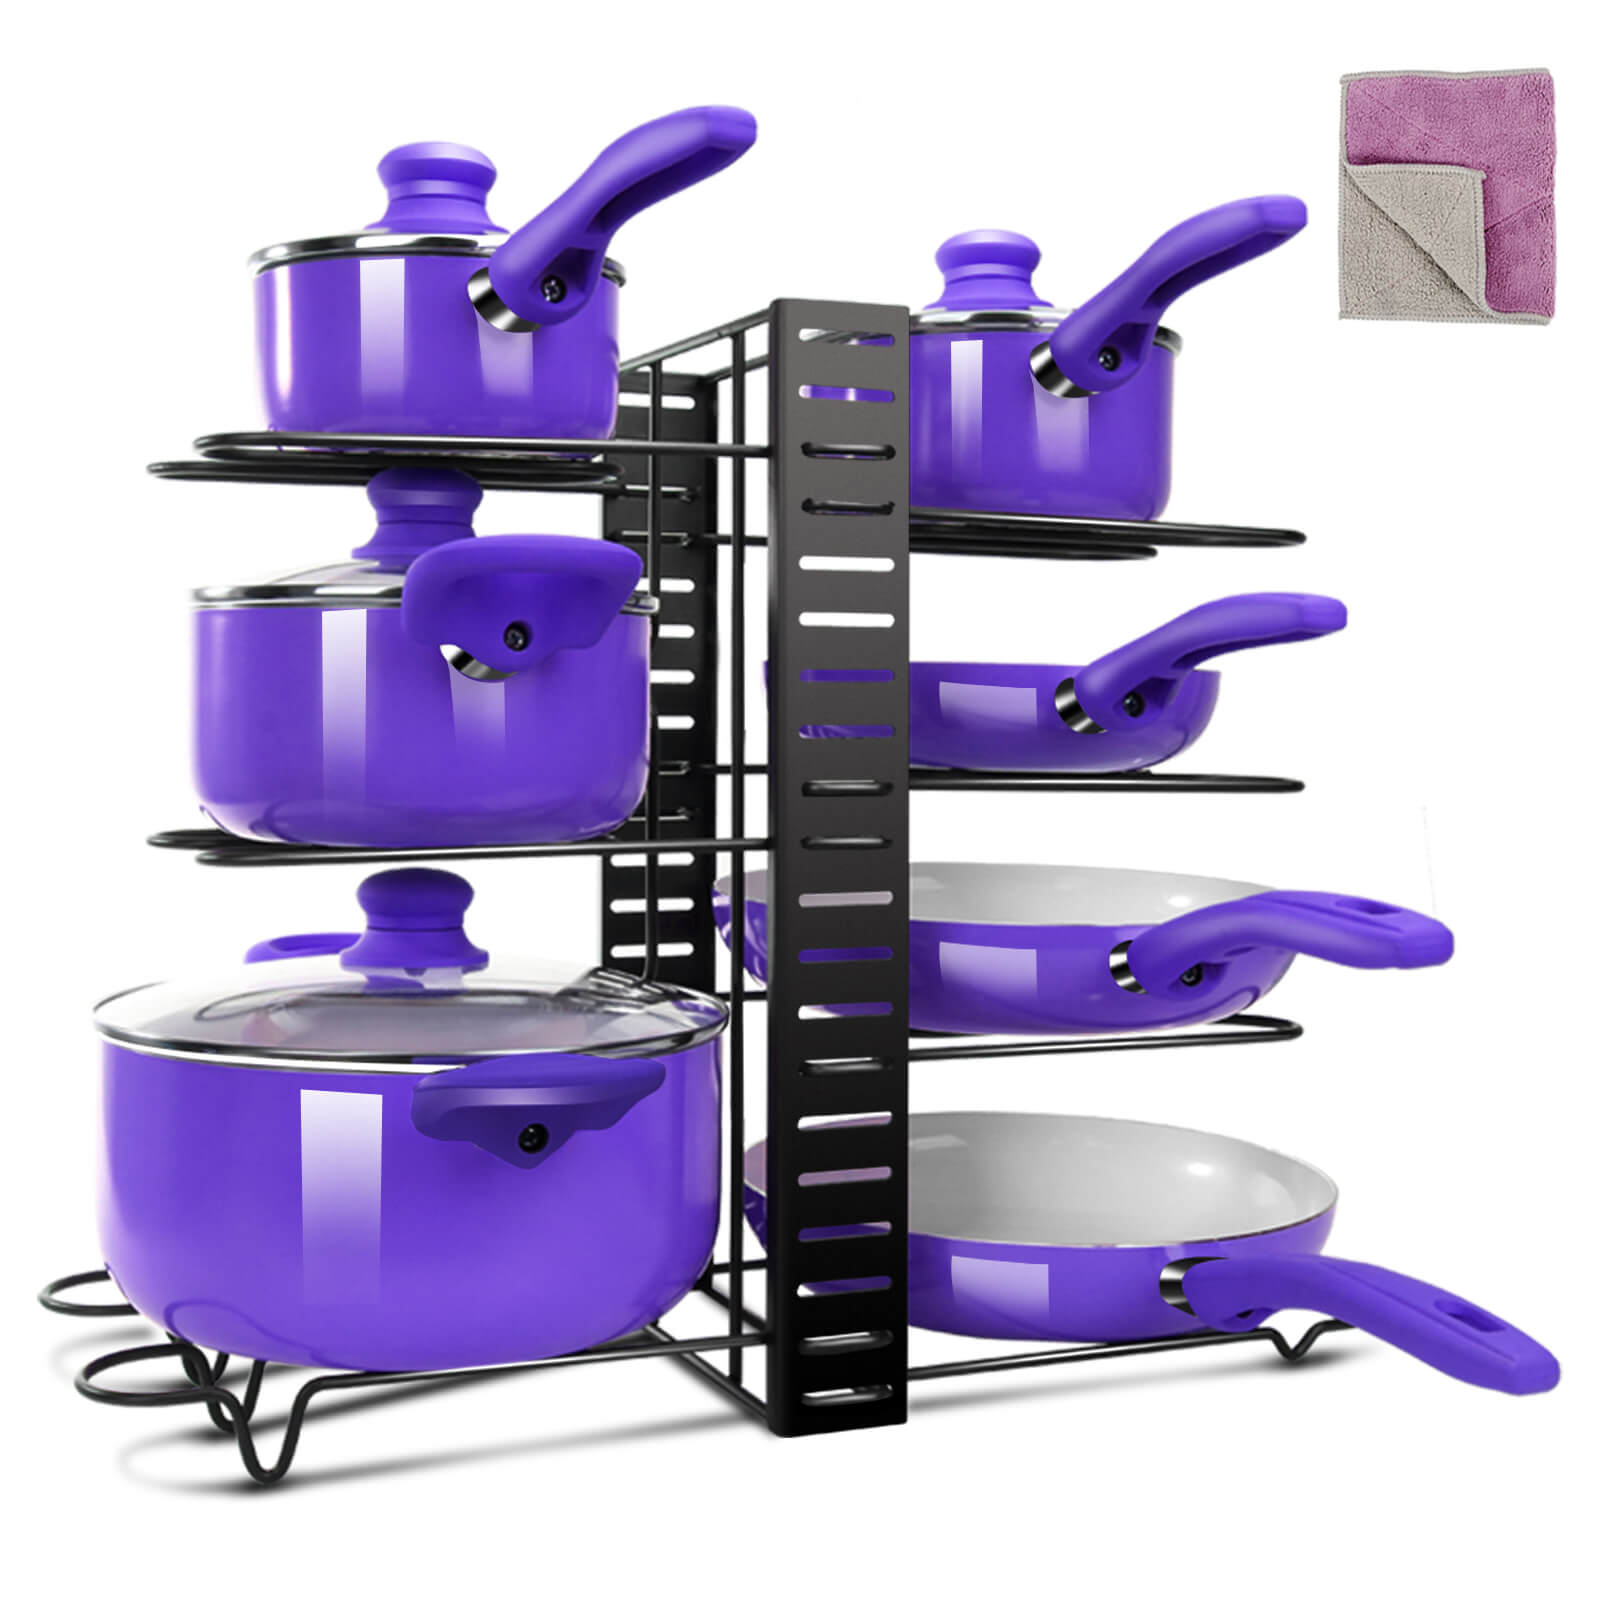 Masthome Pot Rack Organizers for Kitchen Cabinet Countertop